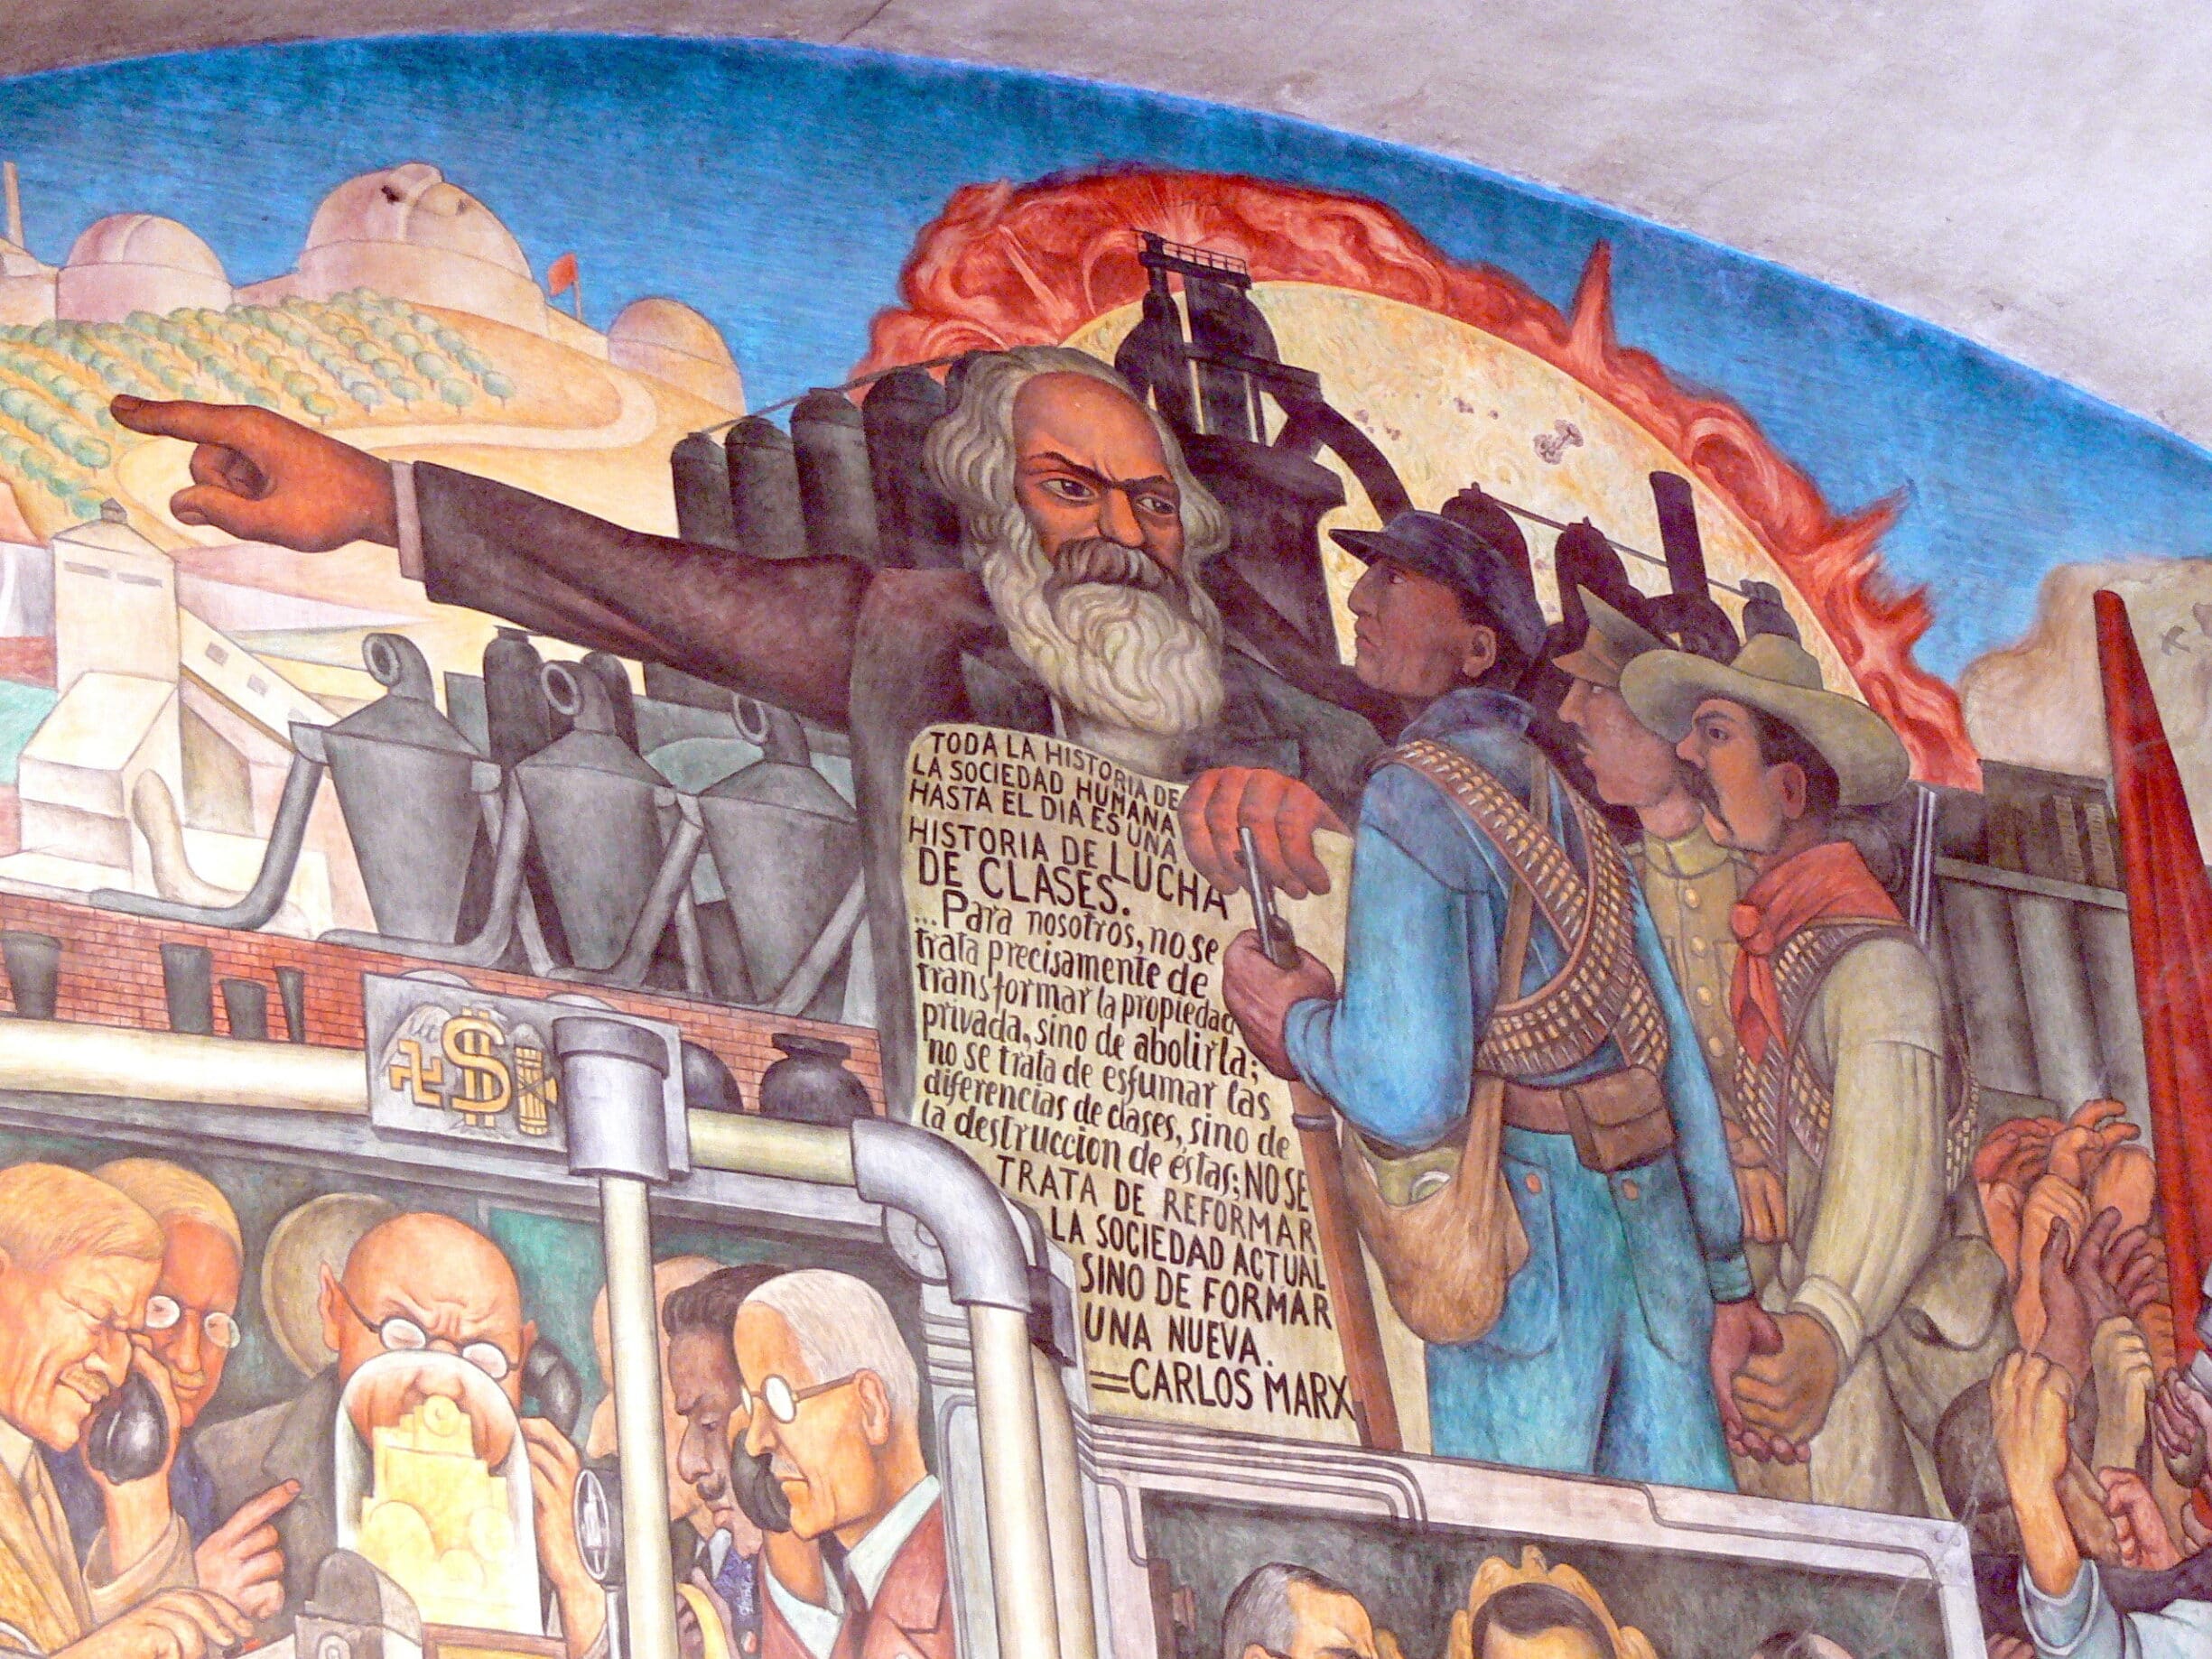 Mexico City - Palacio Nacional. Mural by Diego Rivera showing the History of Mexico: Detail showing Karl Marx. Photo: Taken 09.04.2008 by Wolfgang Sauber. (CC BY-SA 3.0).